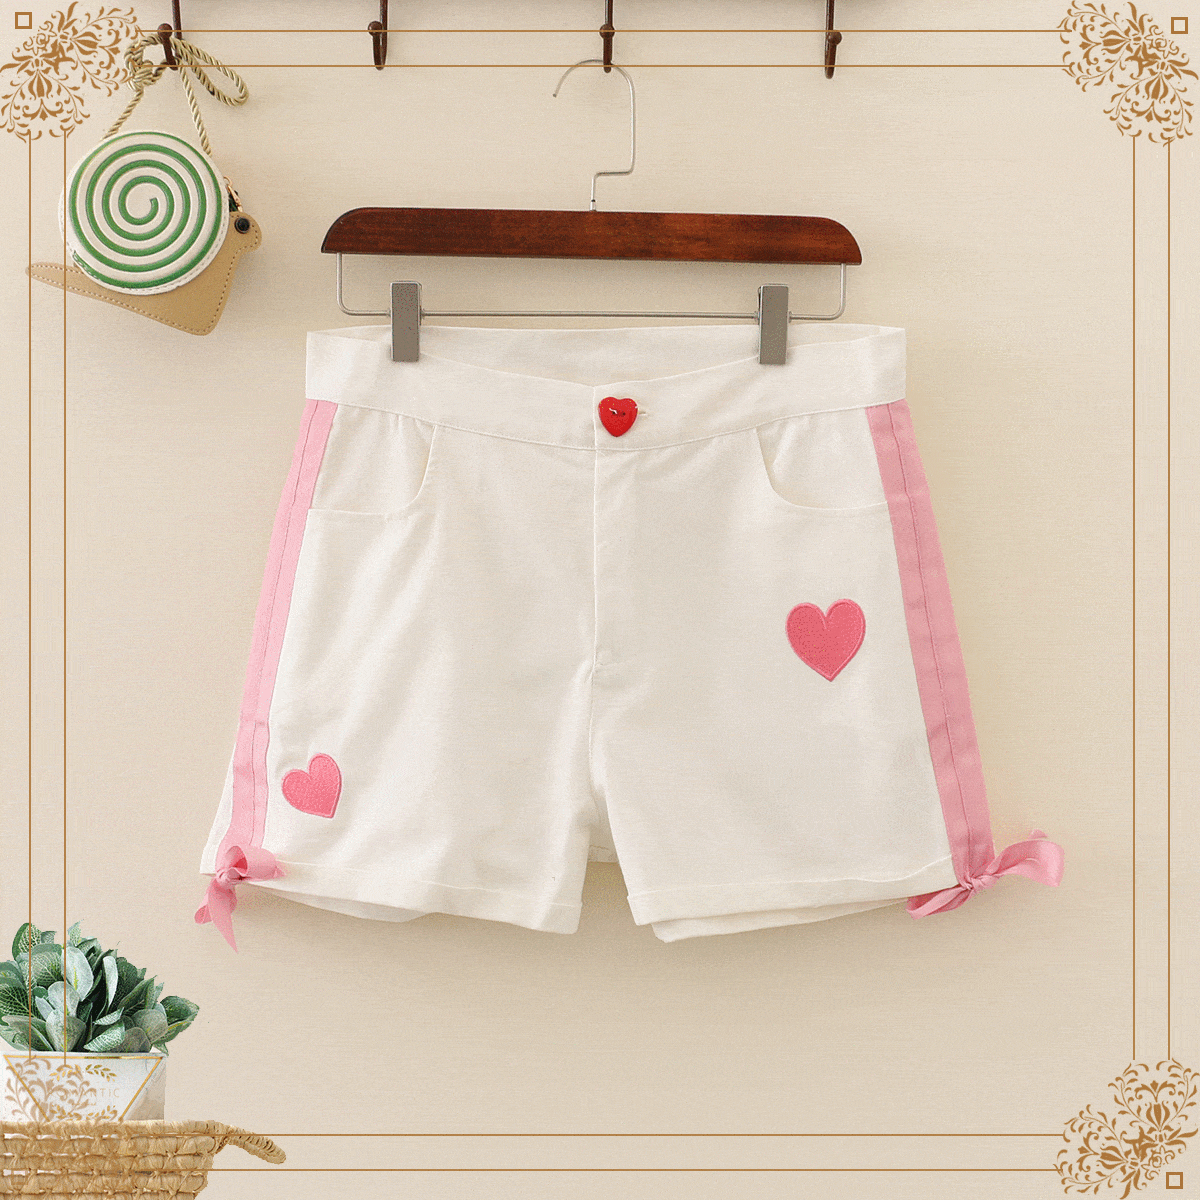 Kawaiifashion Women's Sweet Heart Embroidered Contrast Color Shorts